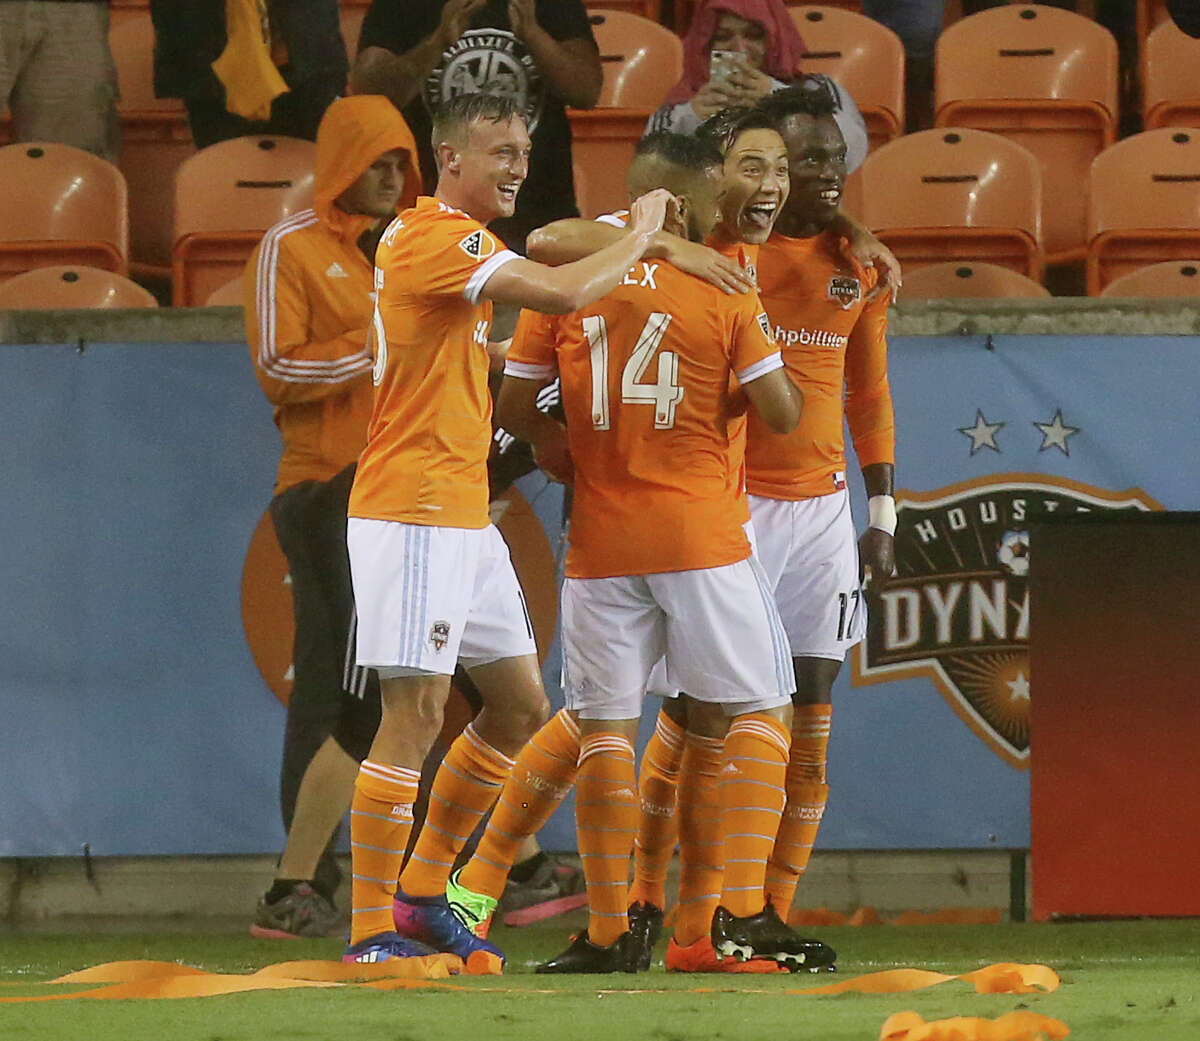 Houston Dynamo forward Erick Torres (9) and teammates celebrate his score during the second half of the MLS soccer game against Columbus Crew SC at BBVA Compass Stadium Saturday, March 11, 2017, in Houston. The Dynamo defeated Columbus, 3-1. ( Yi-Chin Lee / Houston Chronicle )